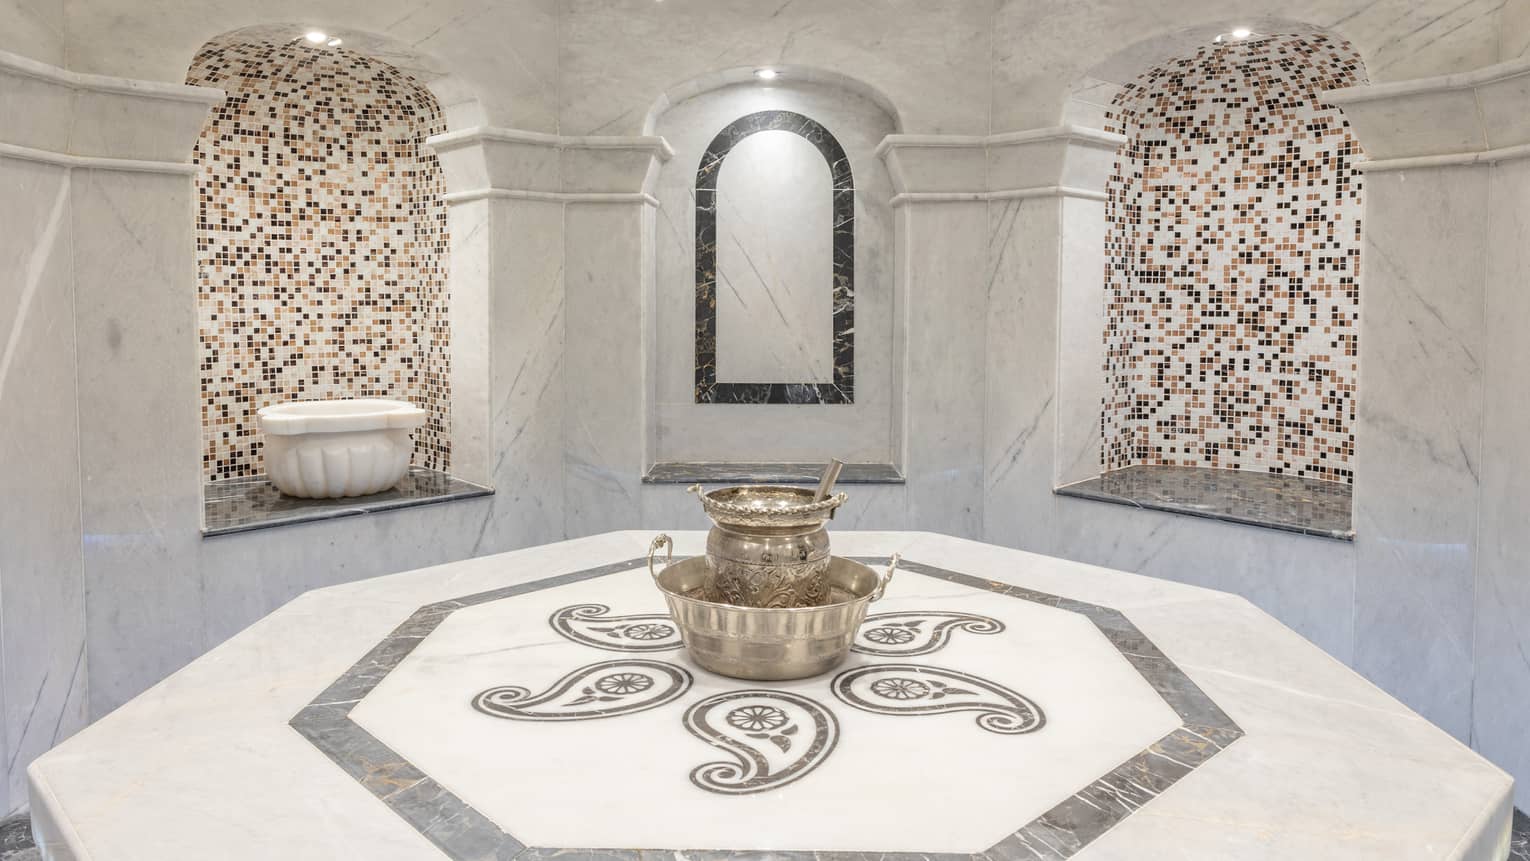 Grey and white marble hammam room with octagonal hammam in centre with brass fixture in c